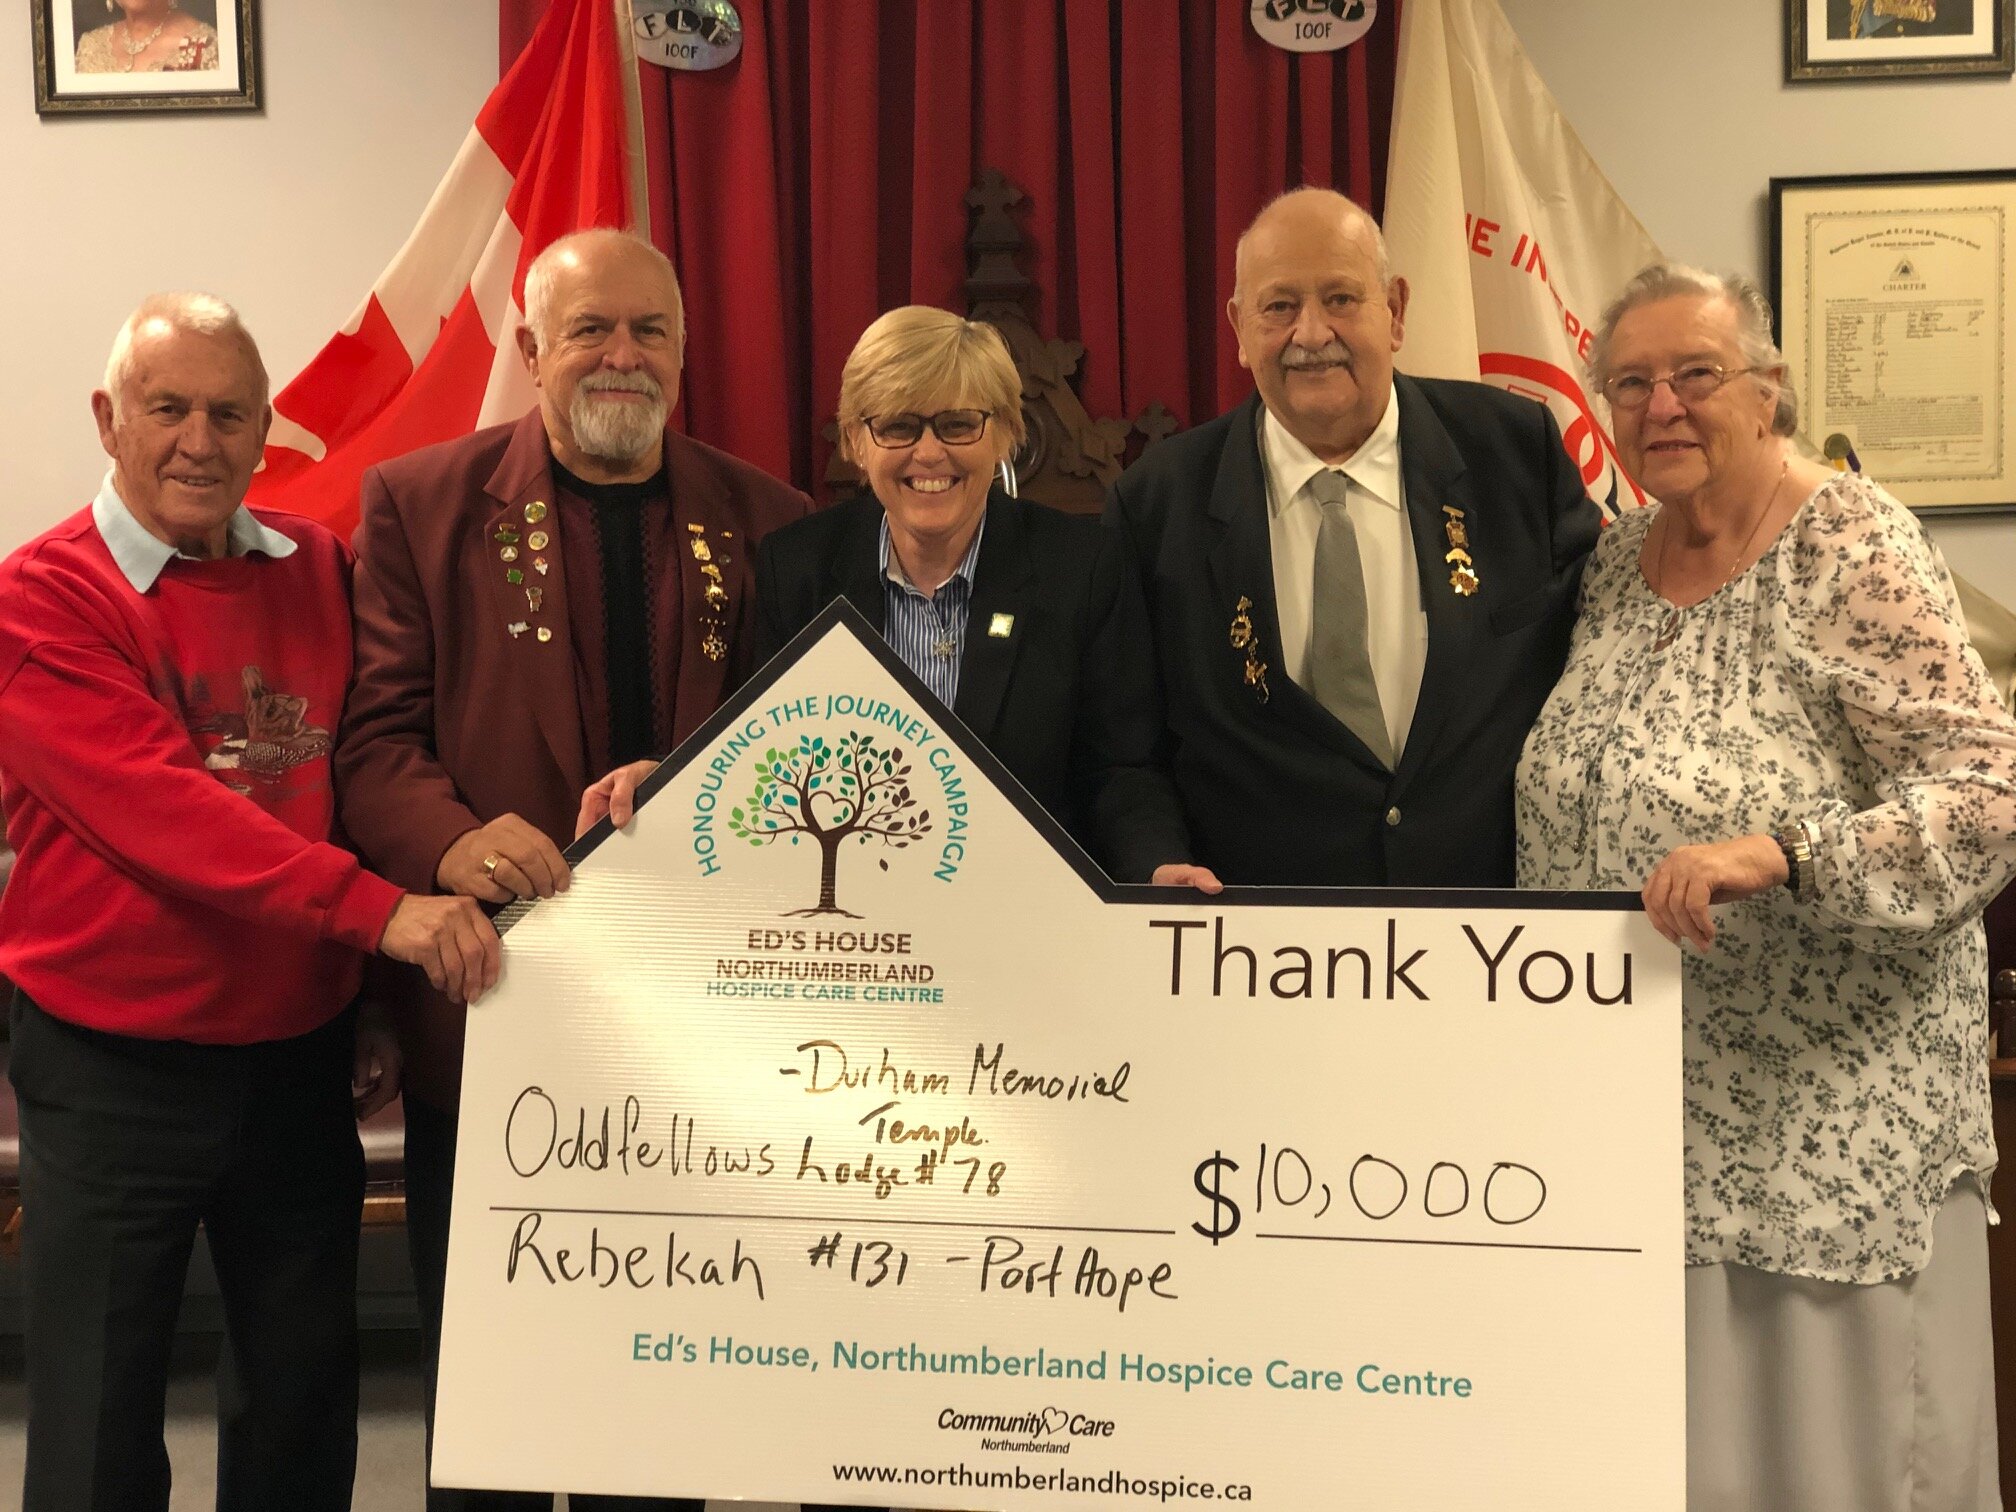  Lynda Kay of the Northumberland Hospice Care Centre (centre) was delighted to receive a $10,000 donation for the project (also known as Ed's House) from the Durham Memorial Temple Oddfellows Lodge #78 Port Hope and Rebekahs #131 members (from left) 